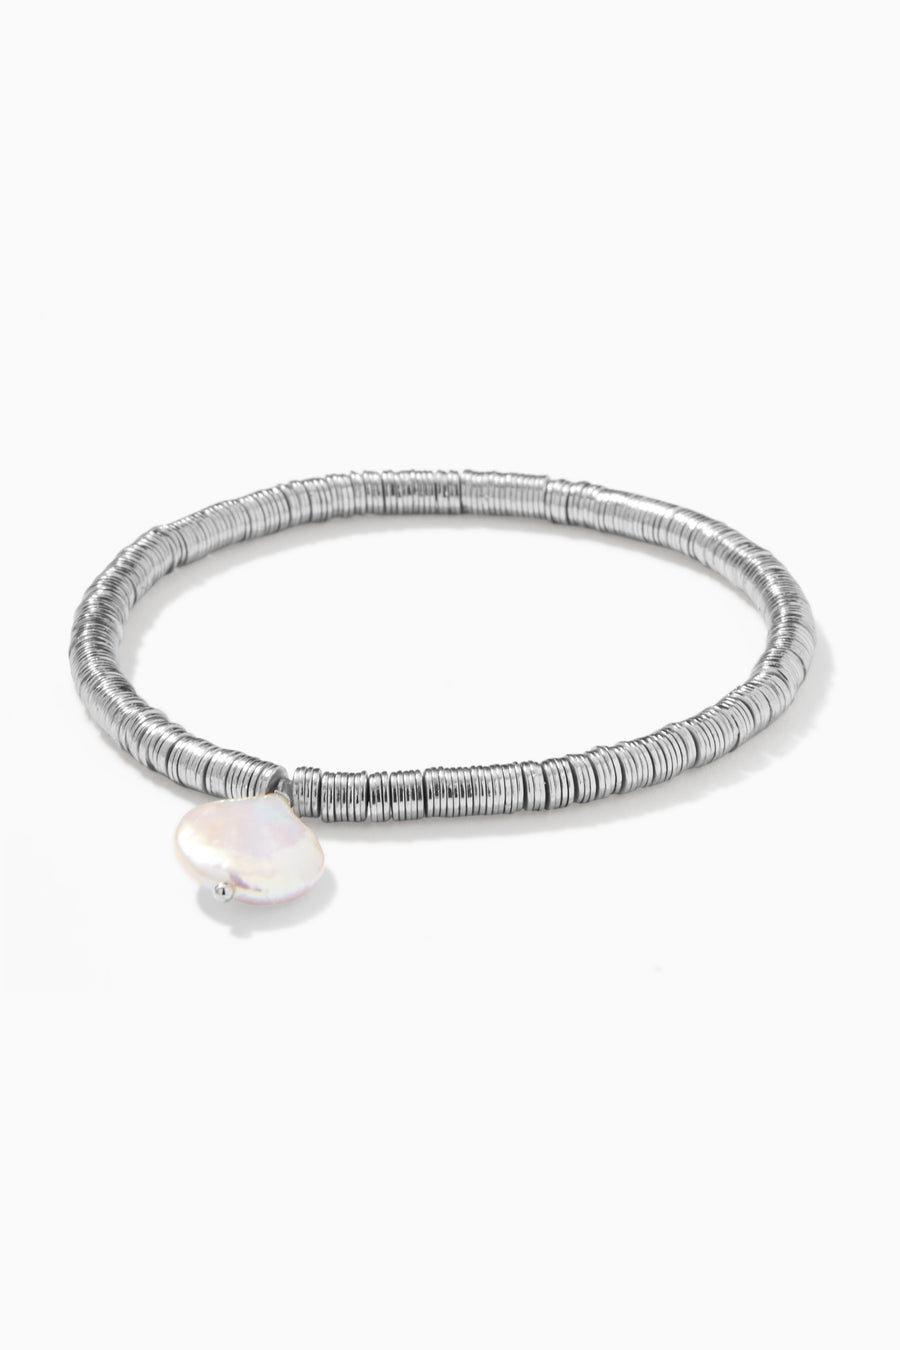 Disc Bead Stretch Bracelet with Coin Pearl - Stella & Dot